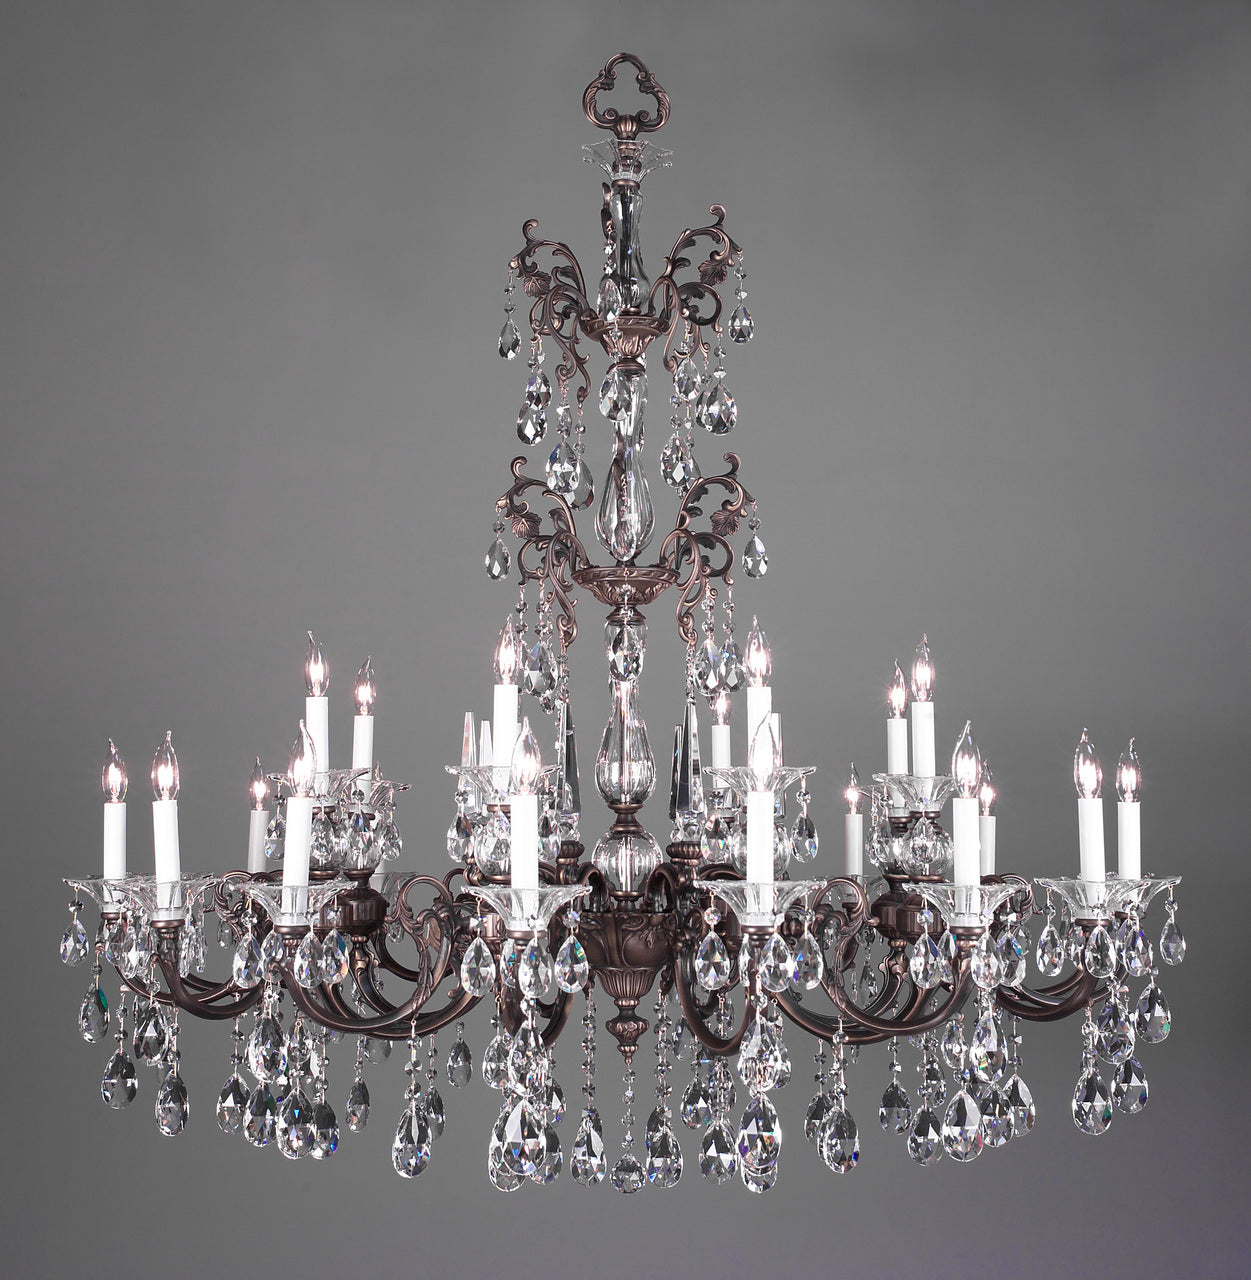 Classic Lighting 57065 SS CBK Via Lombardi Crystal Chandelier in Silverstone (Imported from Spain)